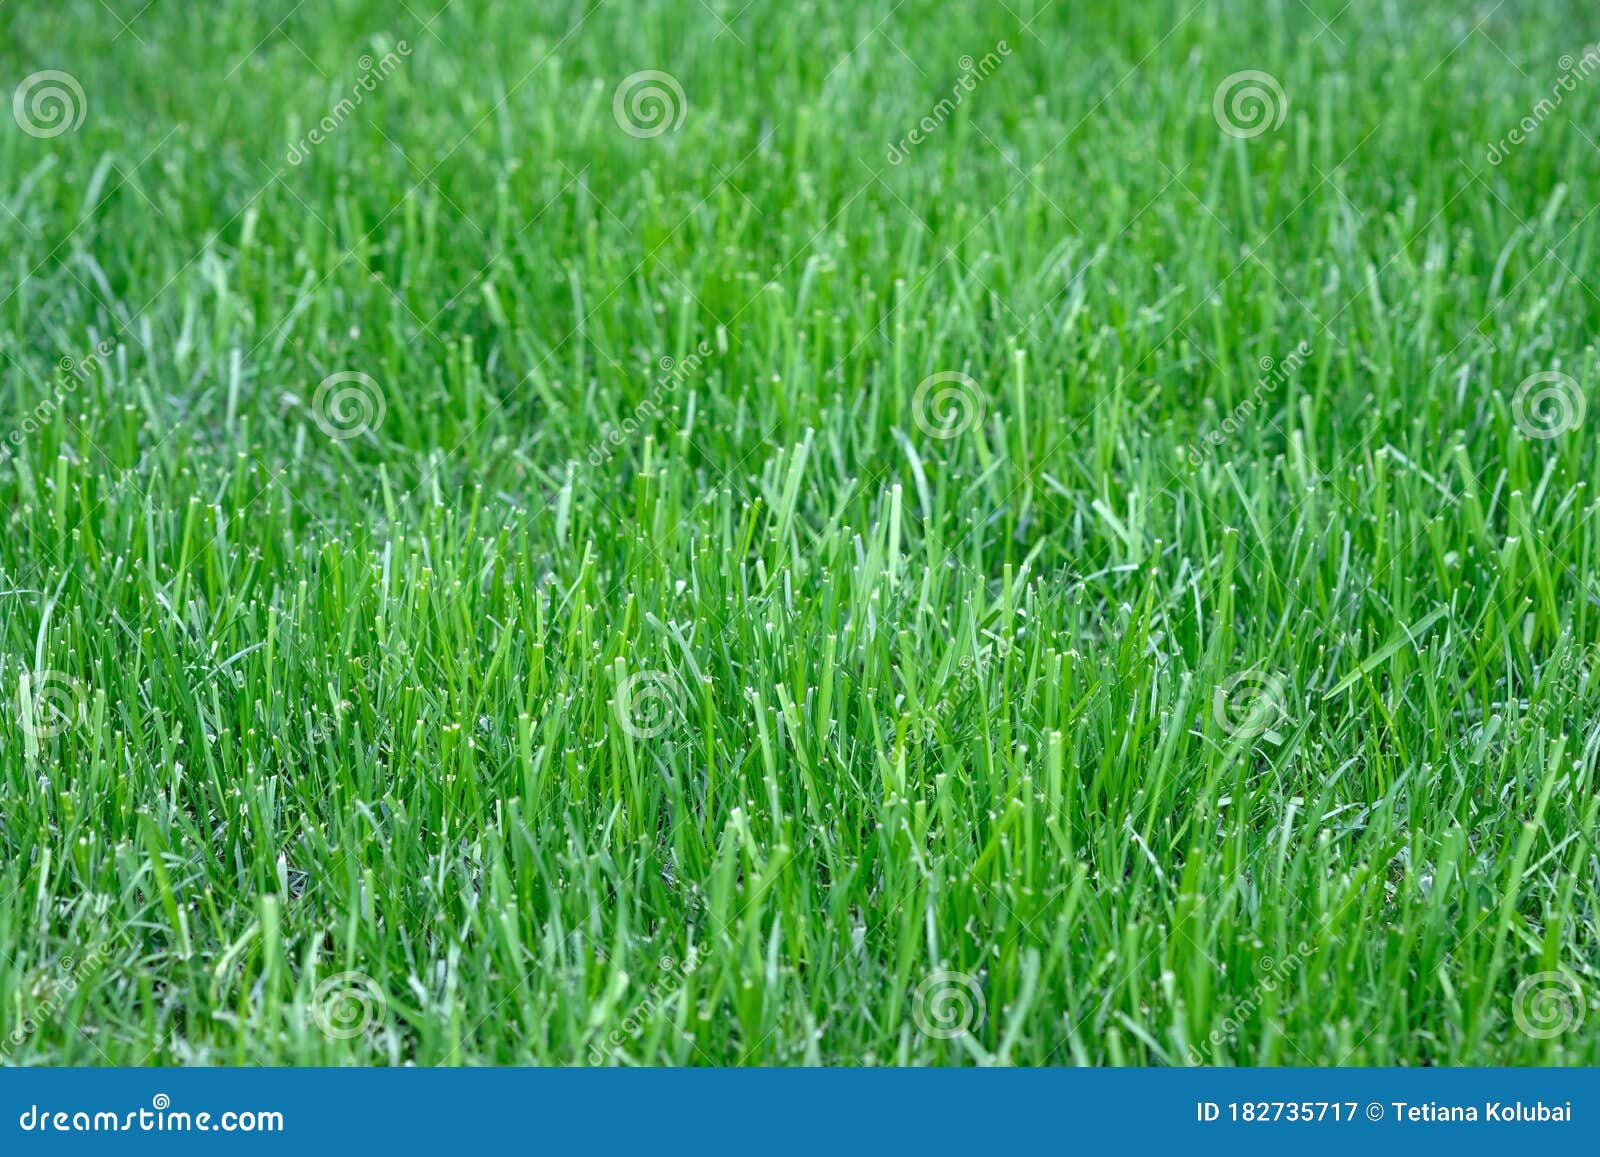 Lawn Grass Mowing Background. Stock Image - Image of lush, closeup